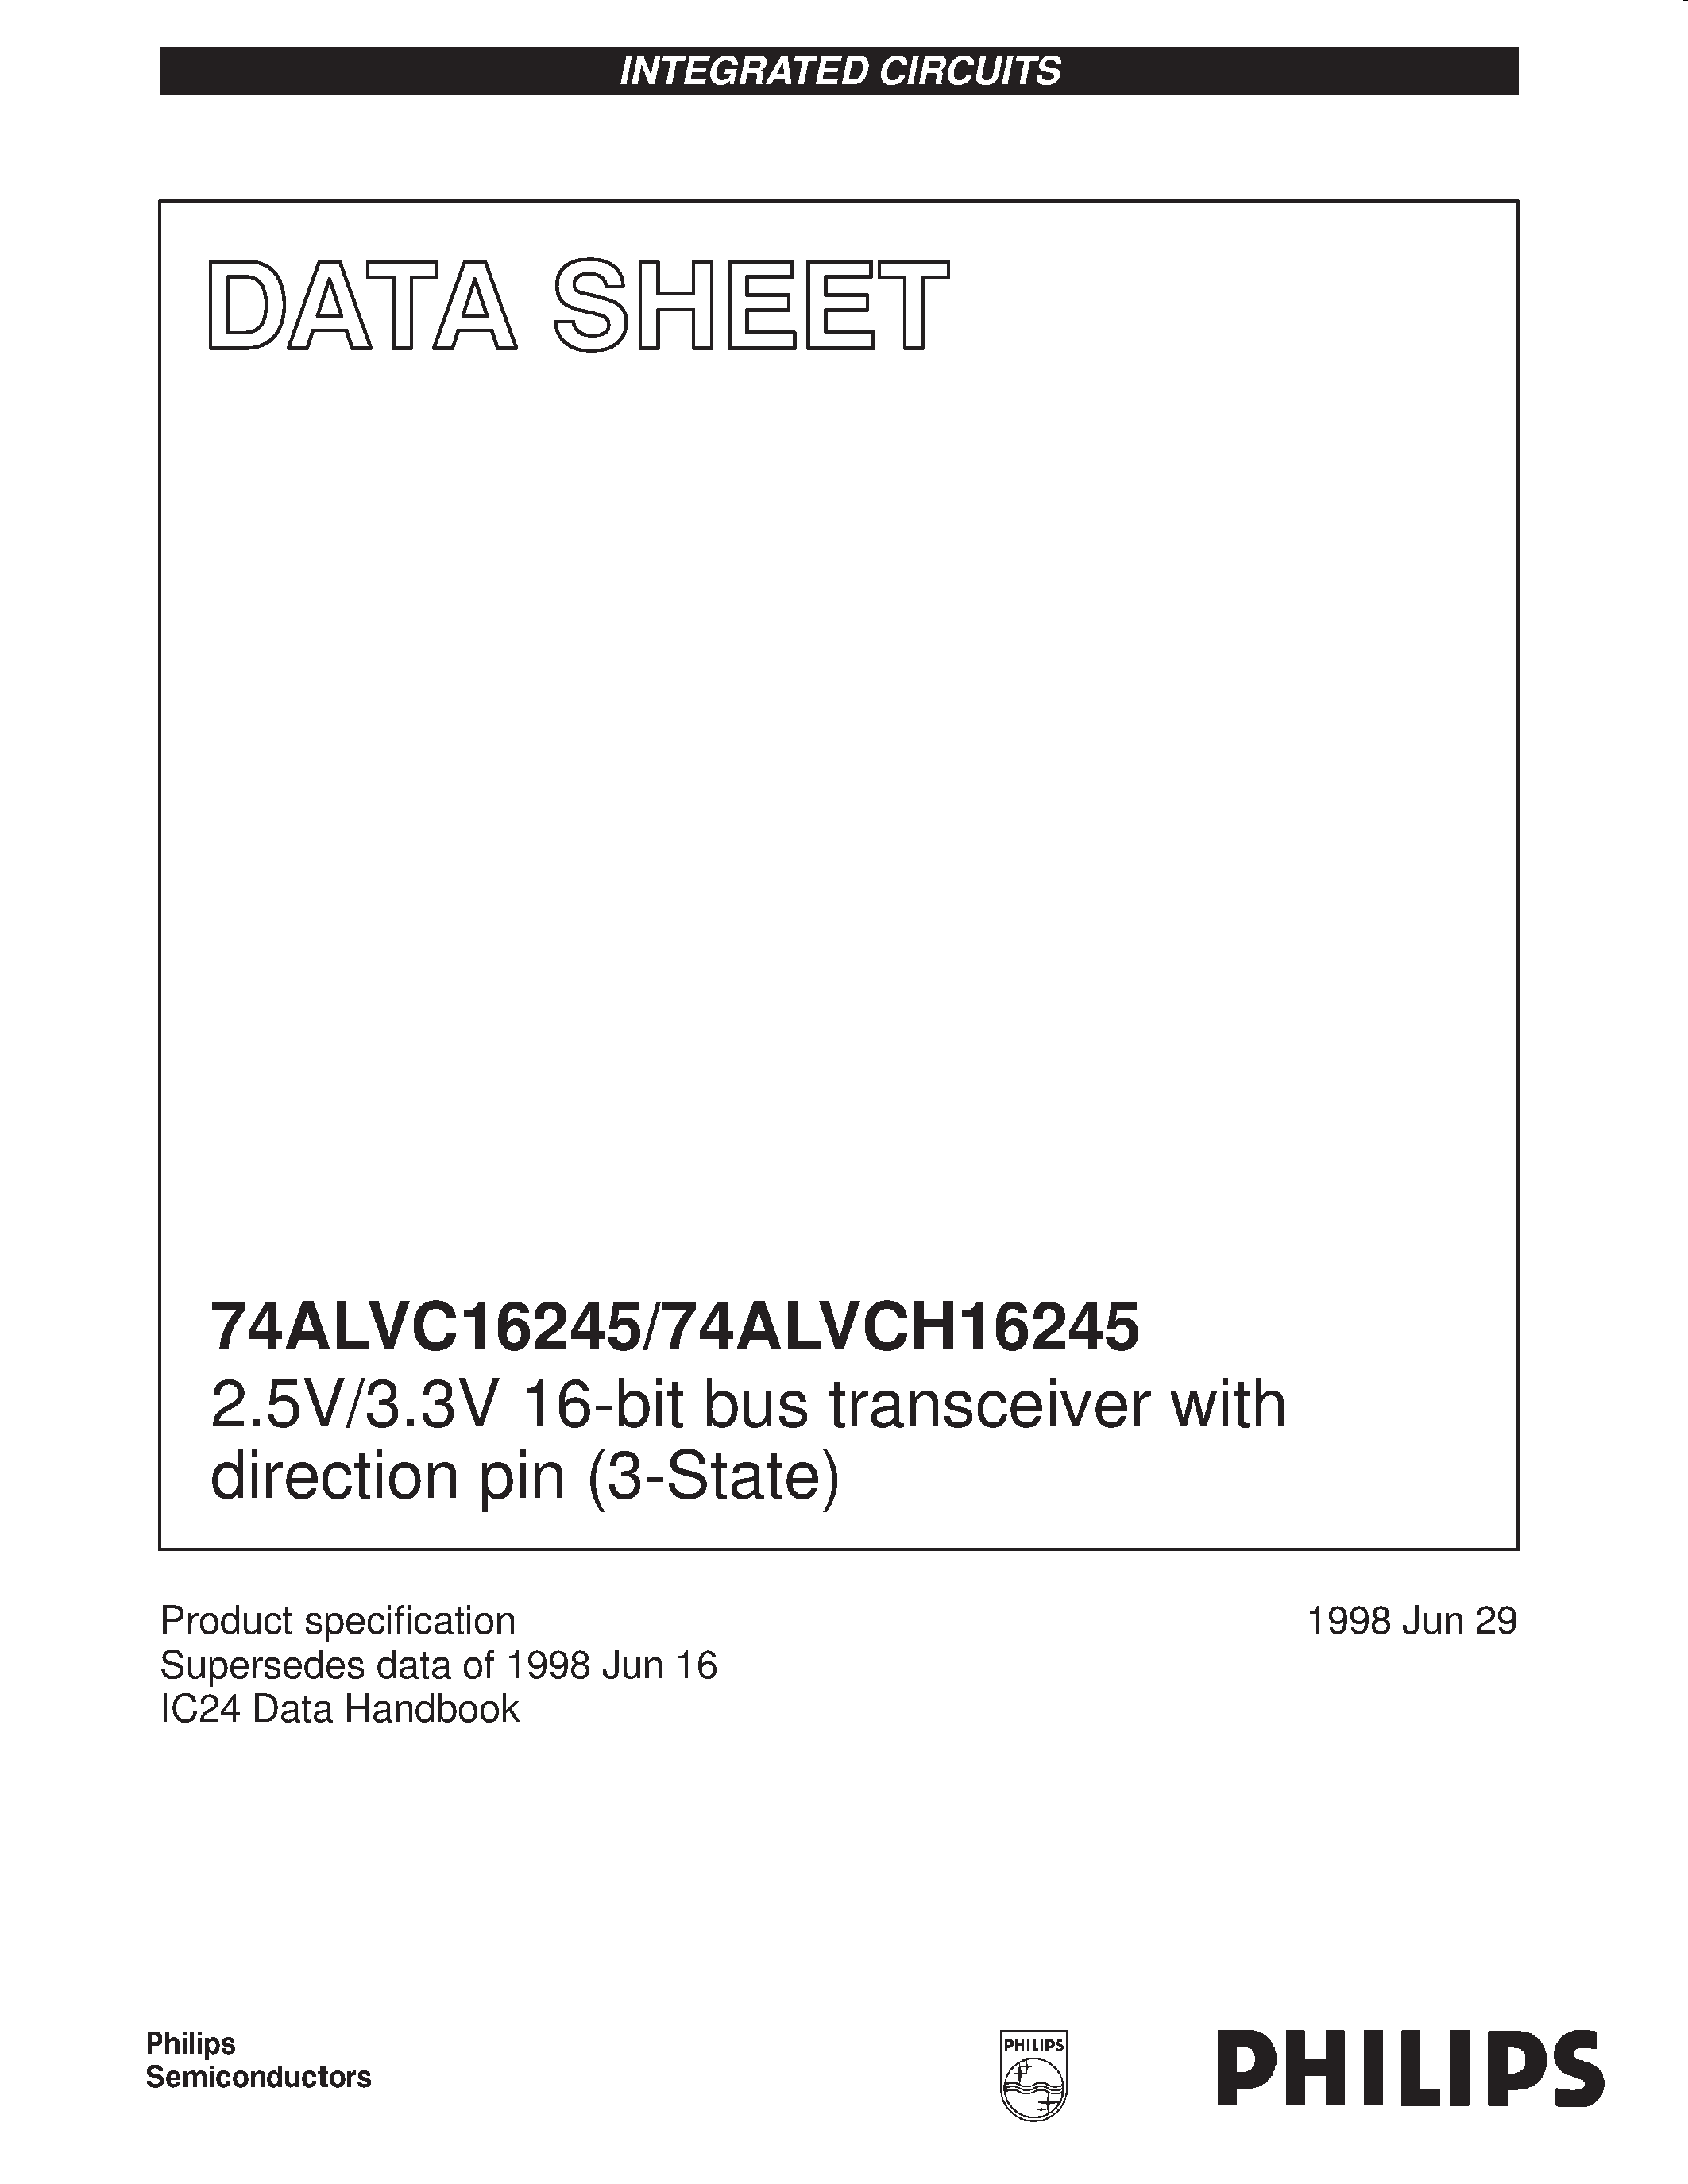 Datasheet 74ALVCH16245 - 2.5V/3.3V 16-bit bus transceiver with direction pin 3-State page 1